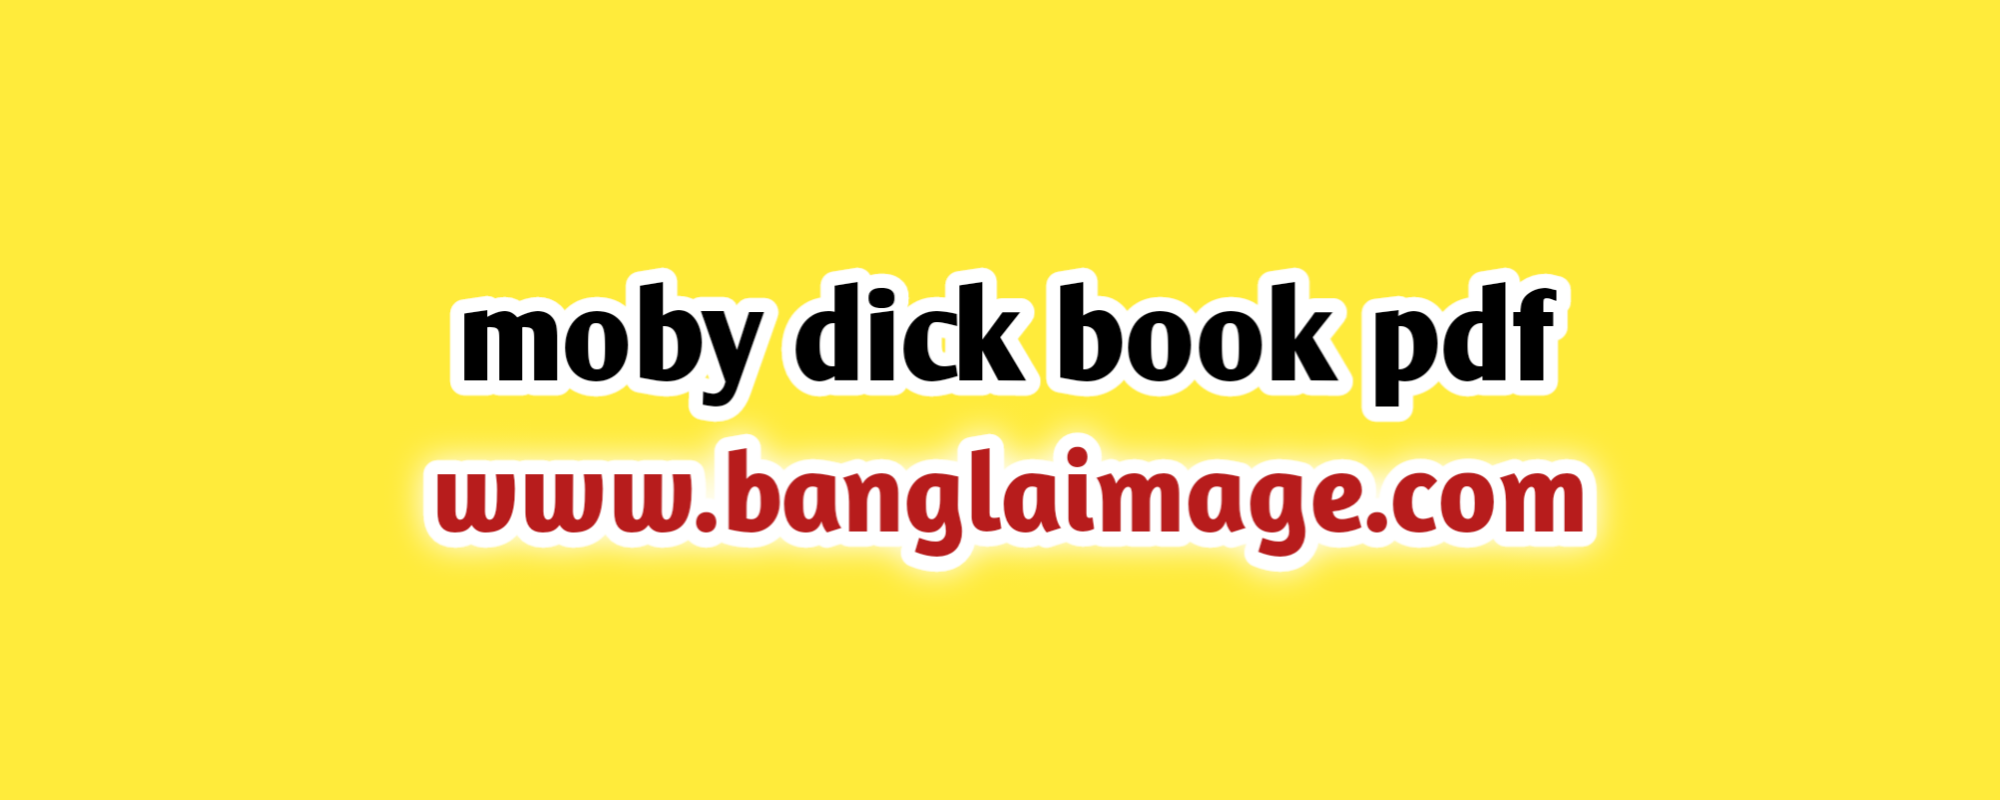 moby dick book pdf, moby dick book pdf download, moby dick book free, the moby dick book pdf download